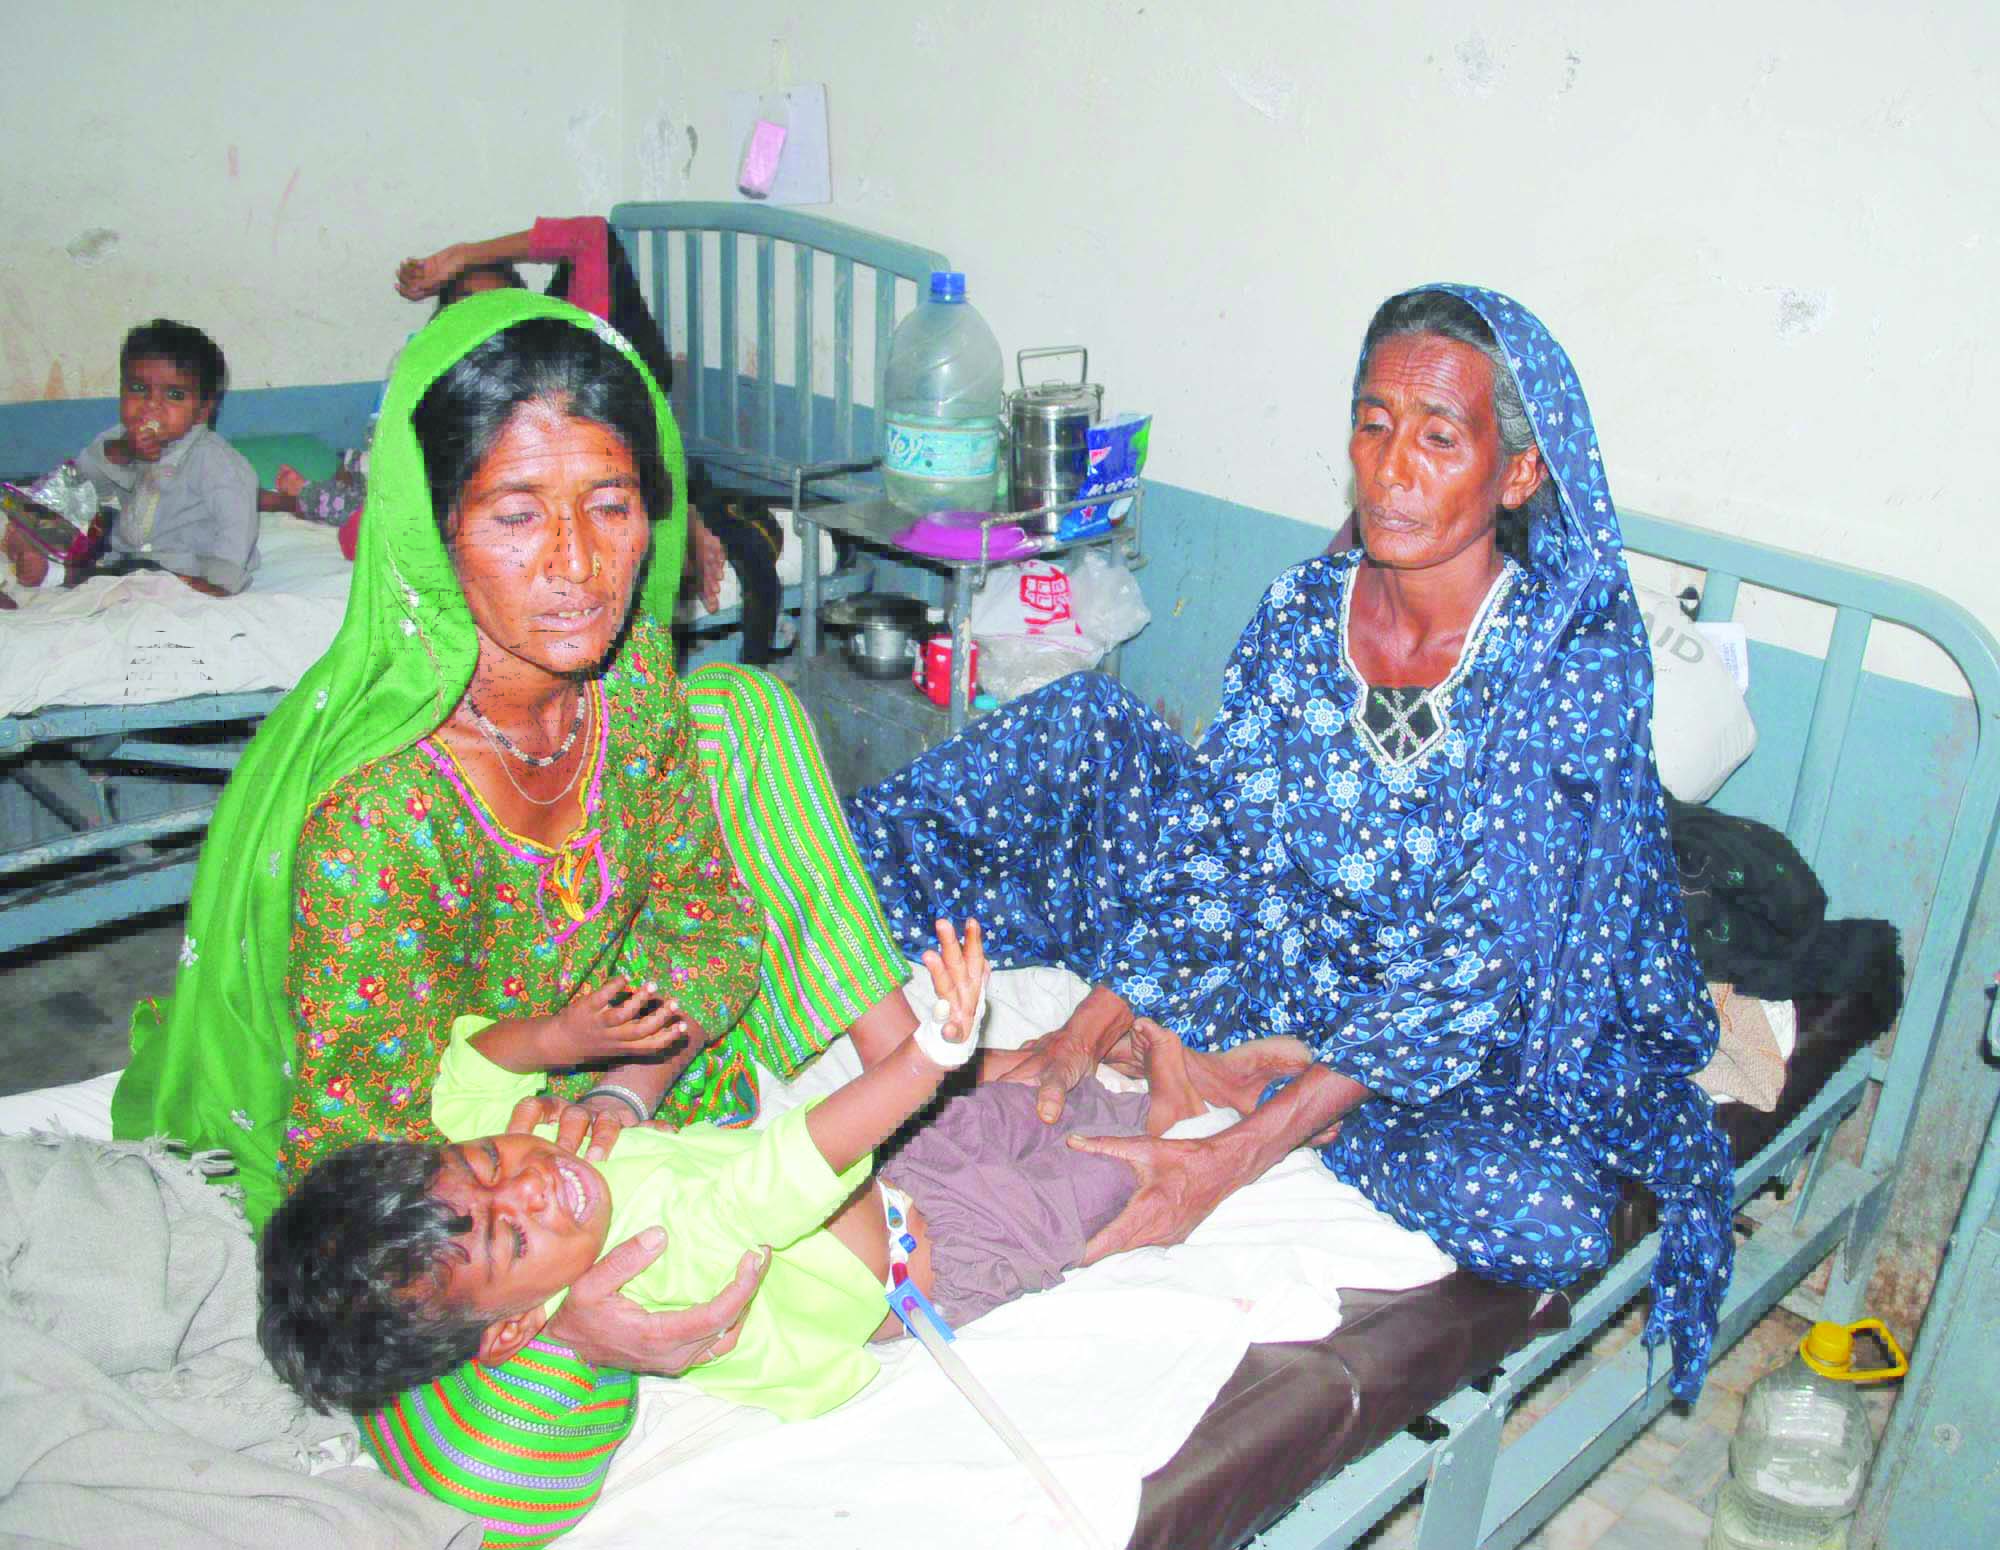 women from tharparkar attend a sick child in civil hospital hyderabad photo file